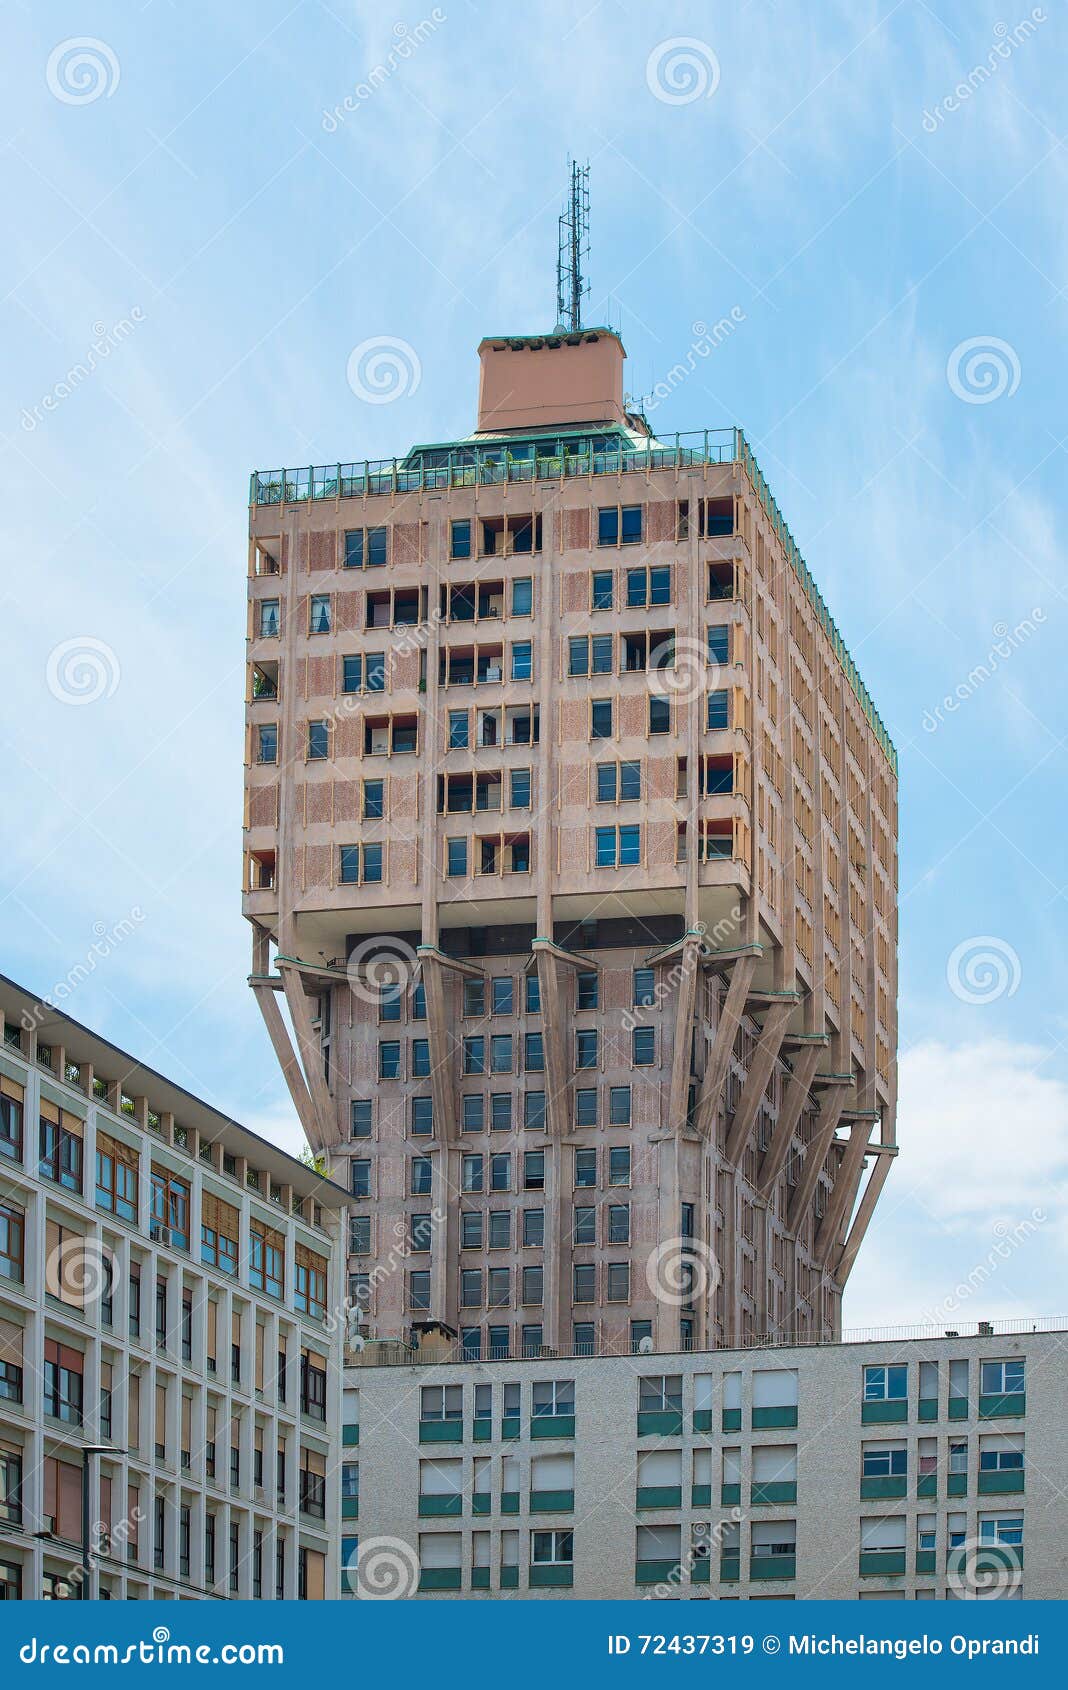 the torre velasca in milan italy